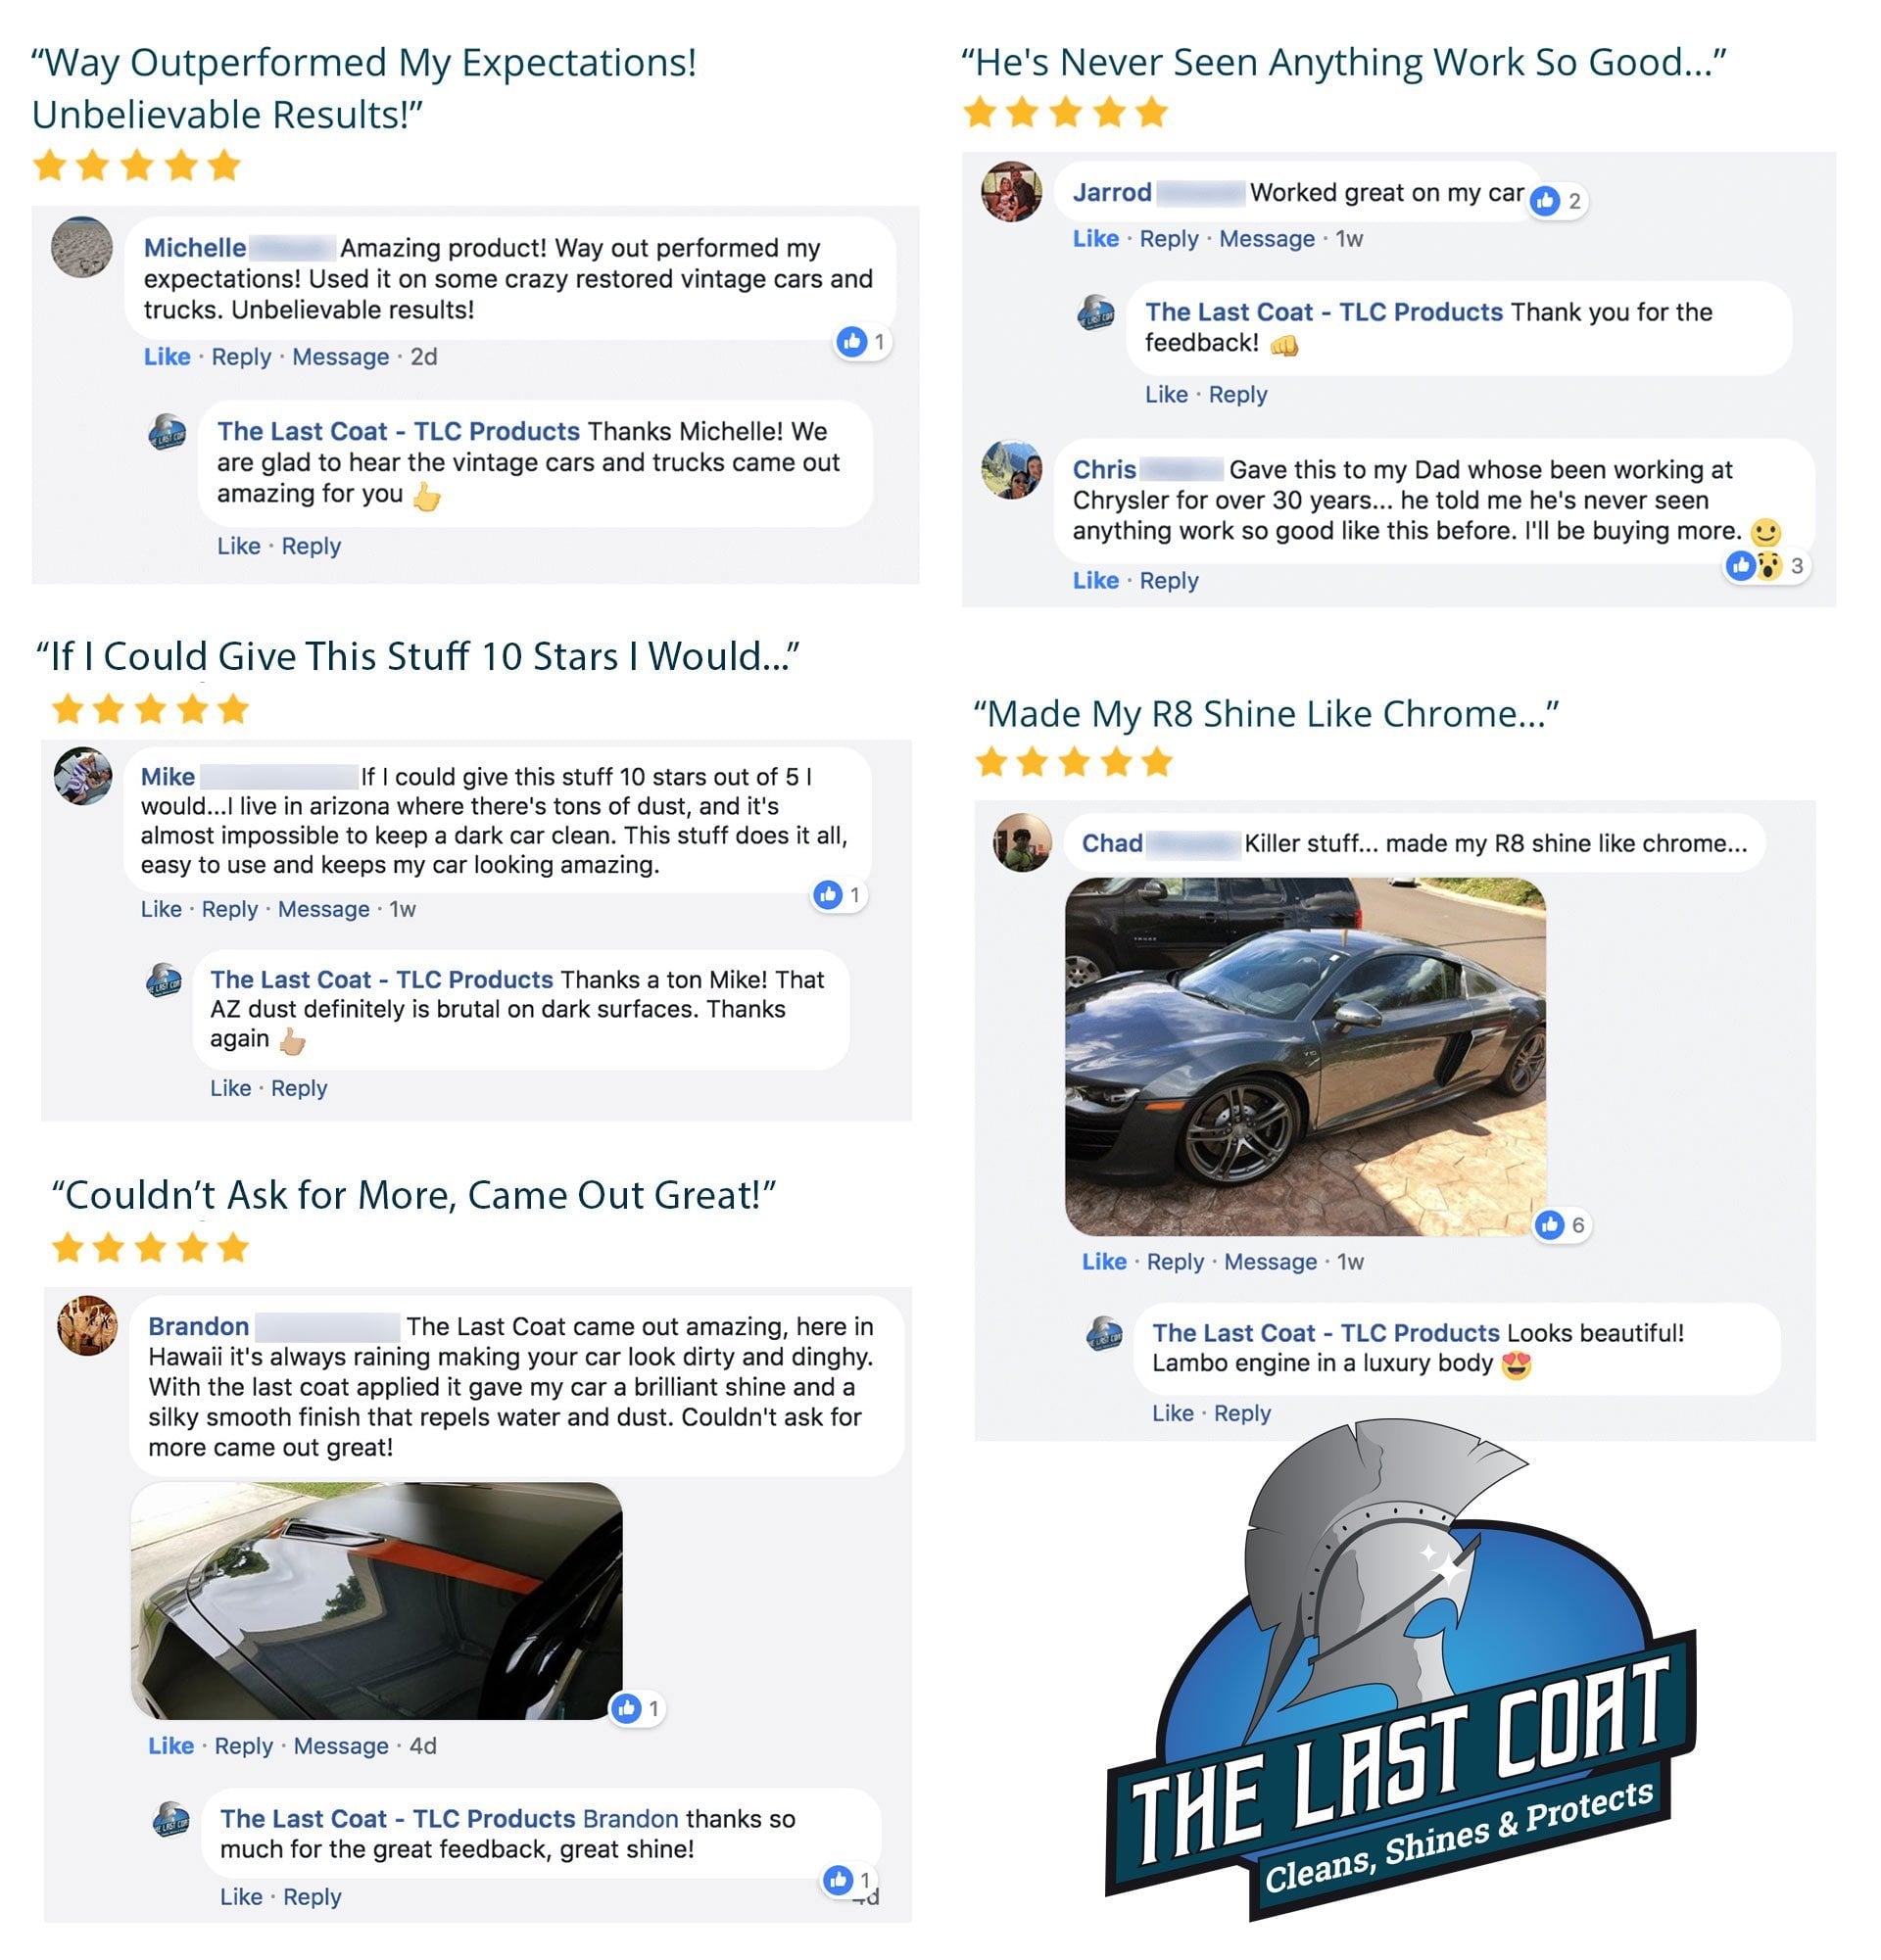 More words from our happy customers!